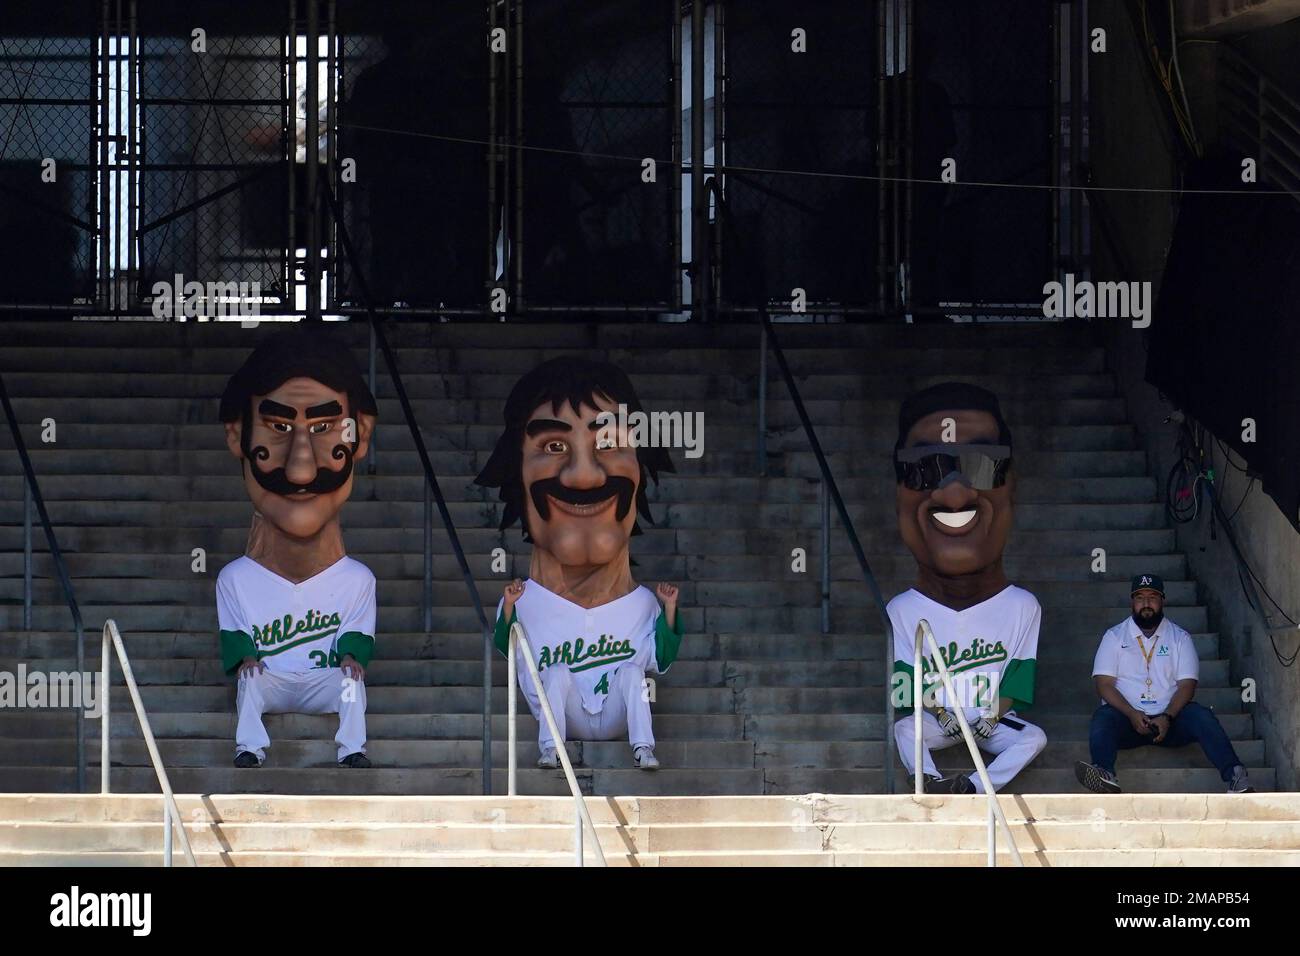 Mascots representing former Oakland Athletics Rollie Fingers, from